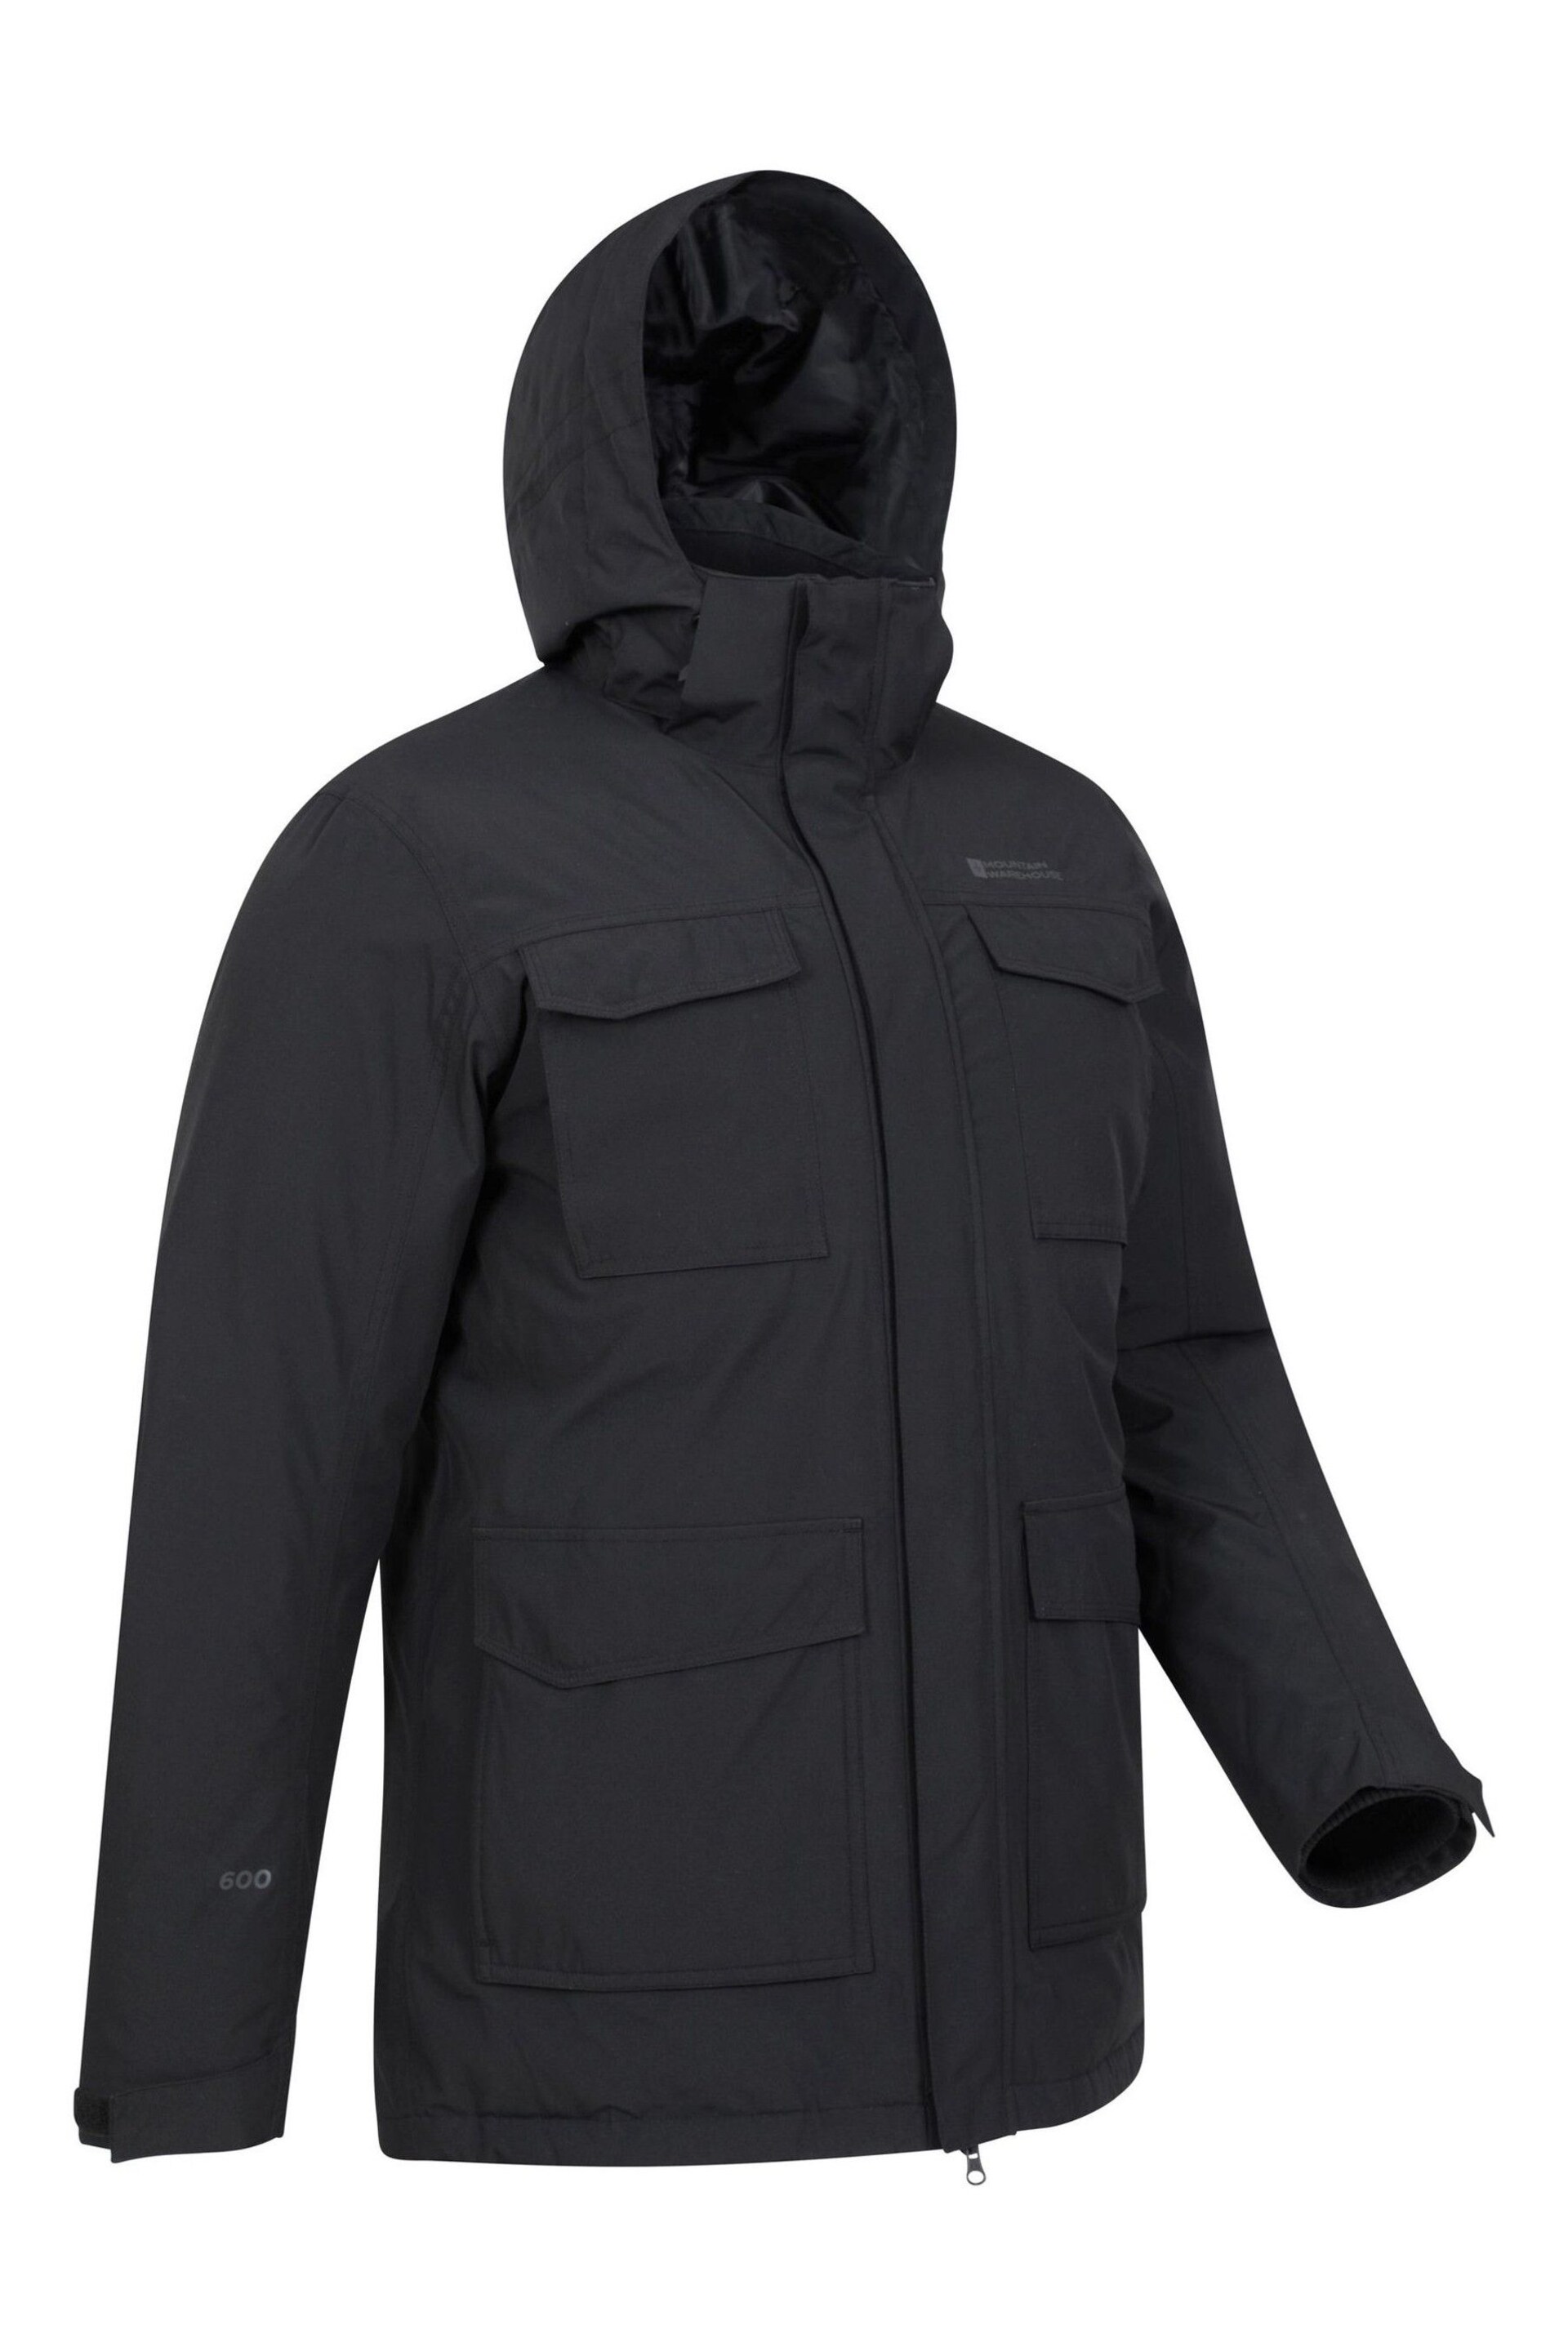 Mountain Warehouse Black Concord Mens Waterproof Extreme Down Long Jacket - Image 1 of 5